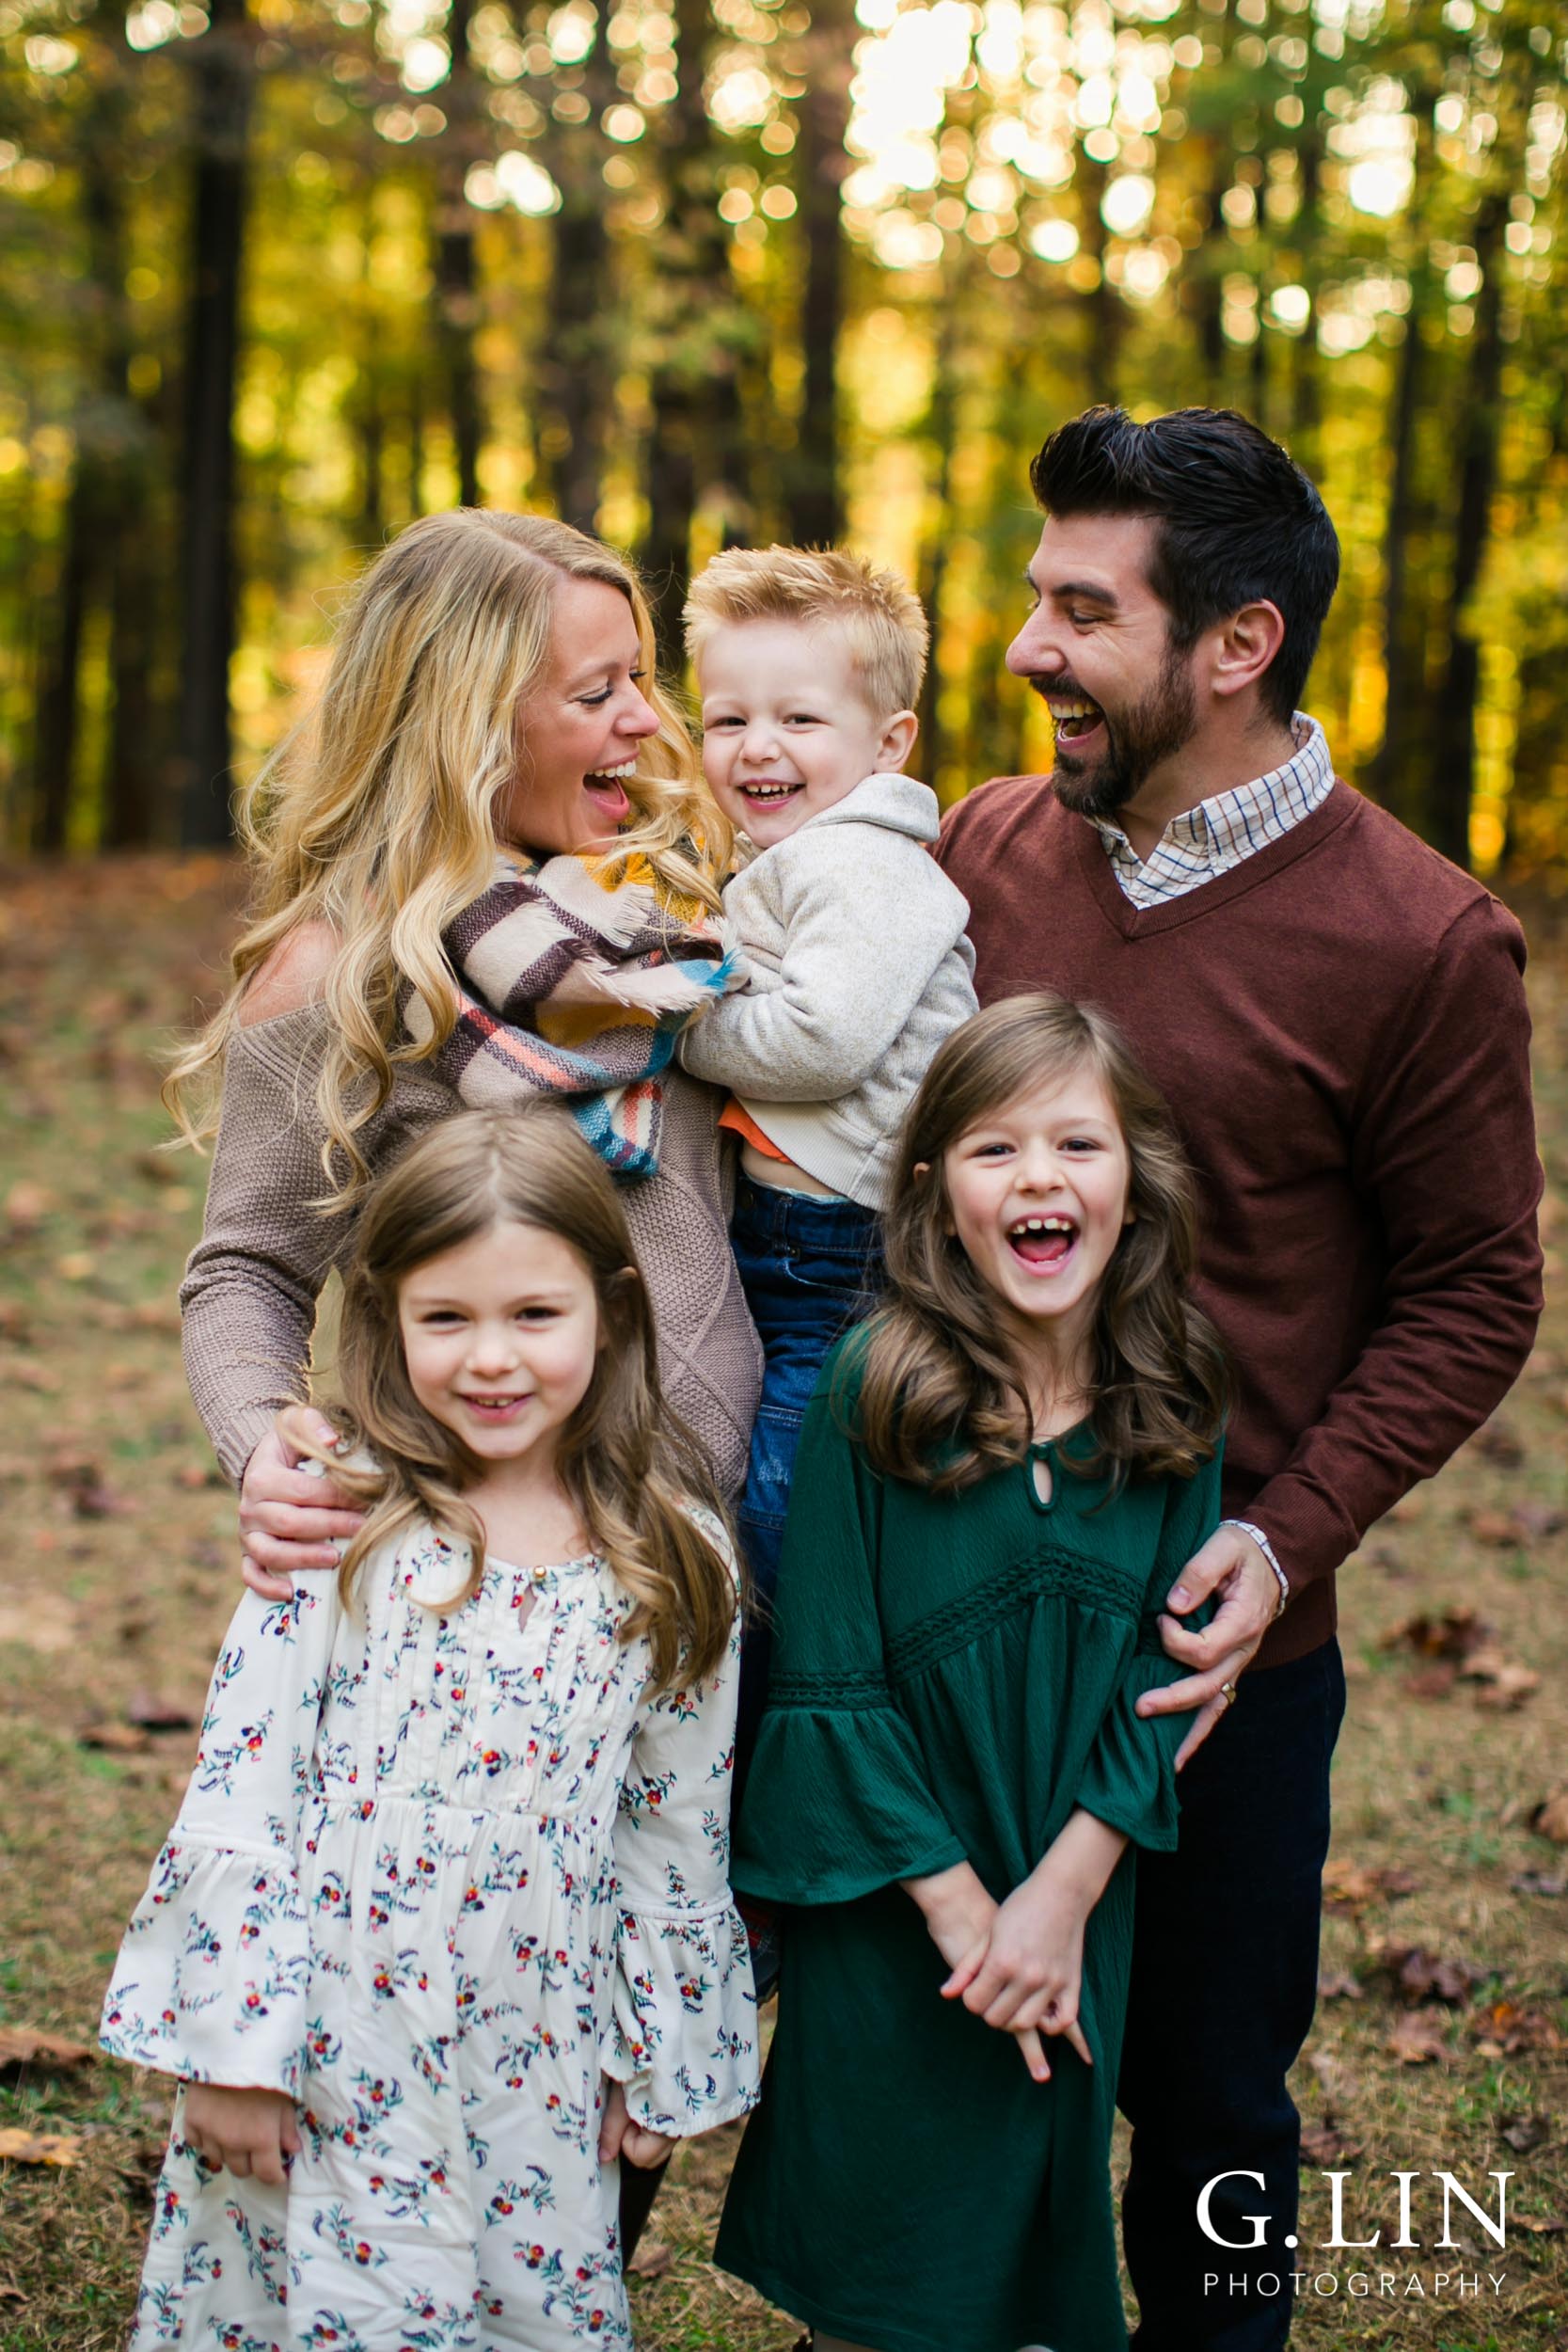 Raleigh Family Photographer | G. Lin Photography | Family together smiling and laughing